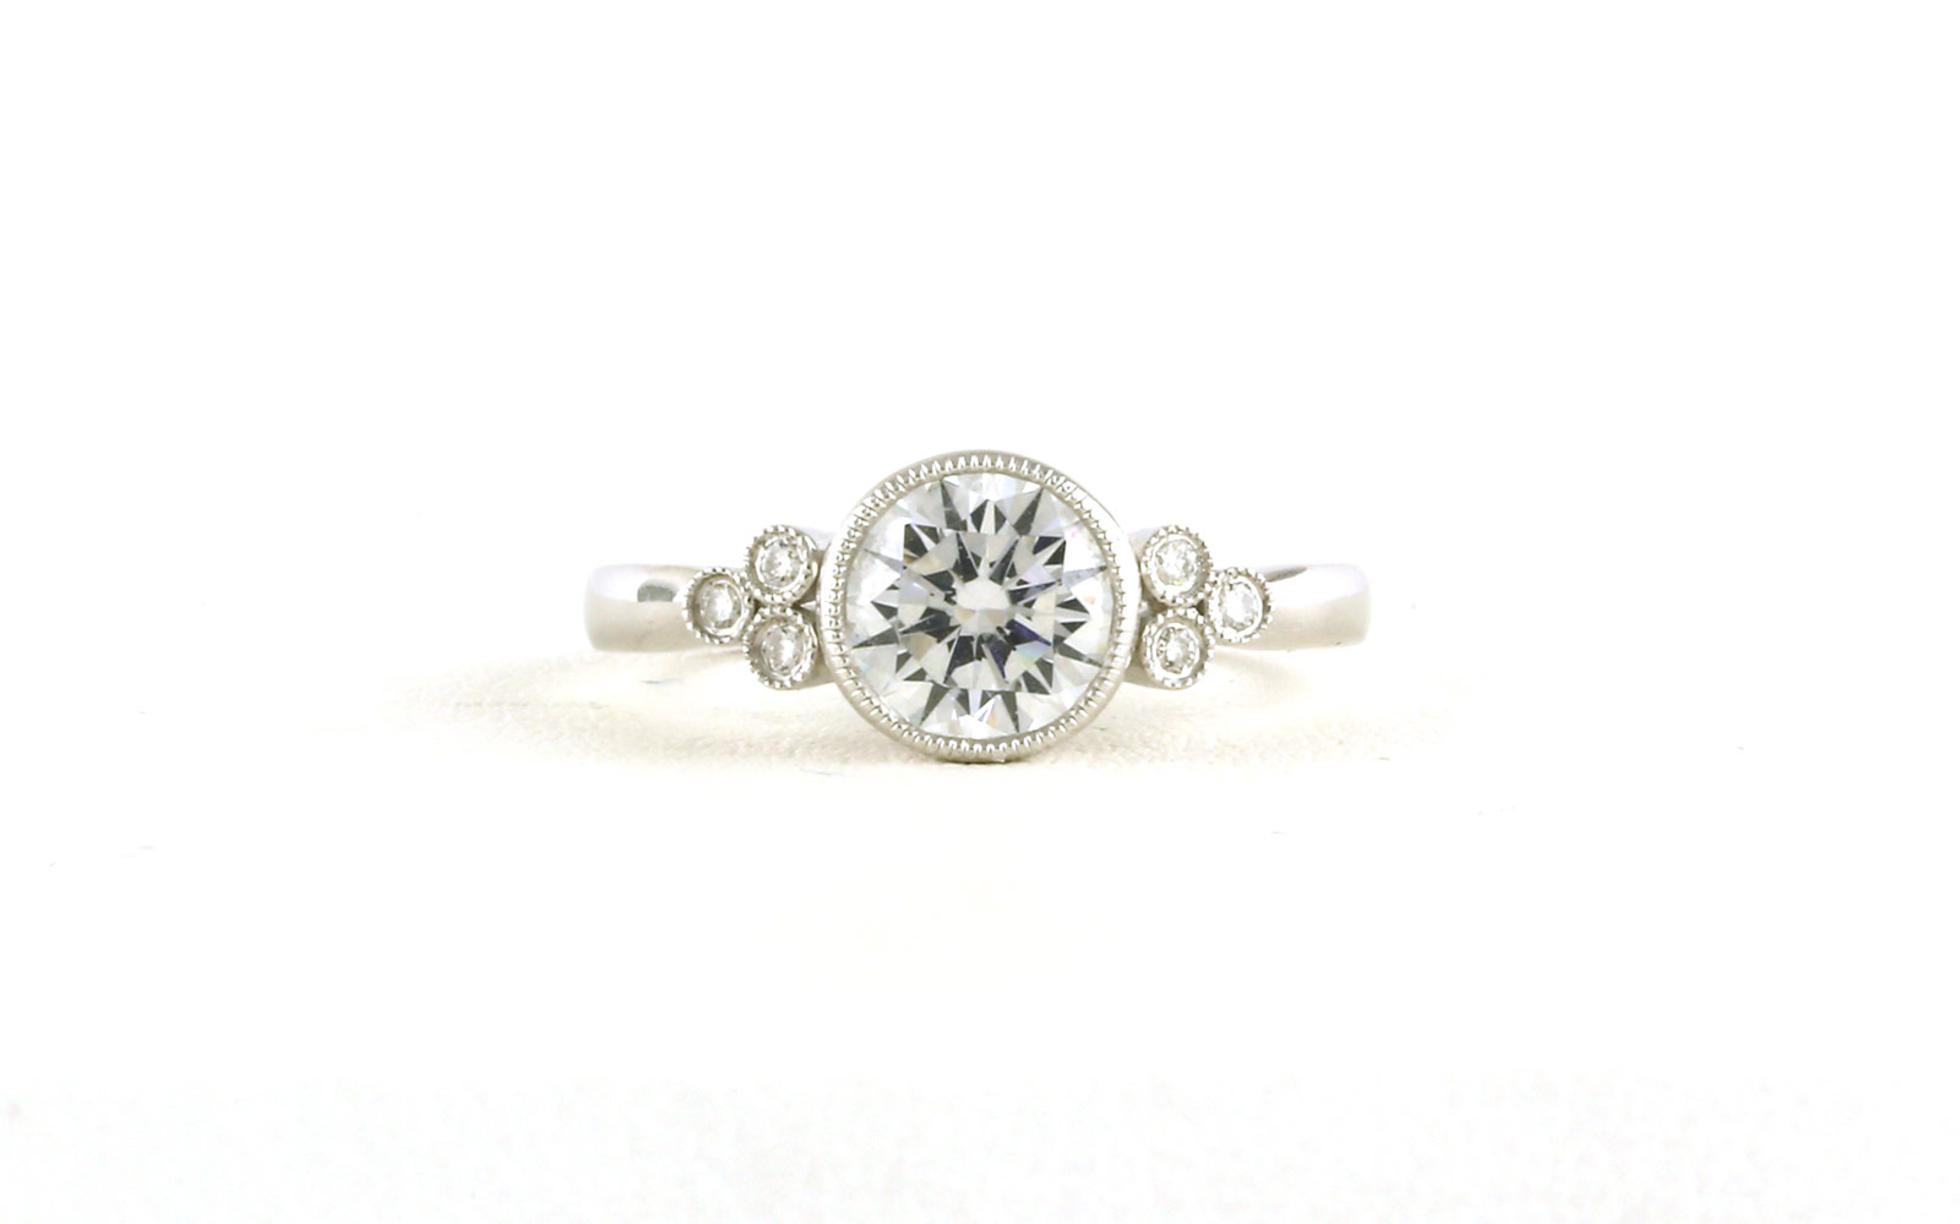 Bezel-set Engagement Ring Mounting with Diamond Cluster Accents and Milgrain Detail in White Gold